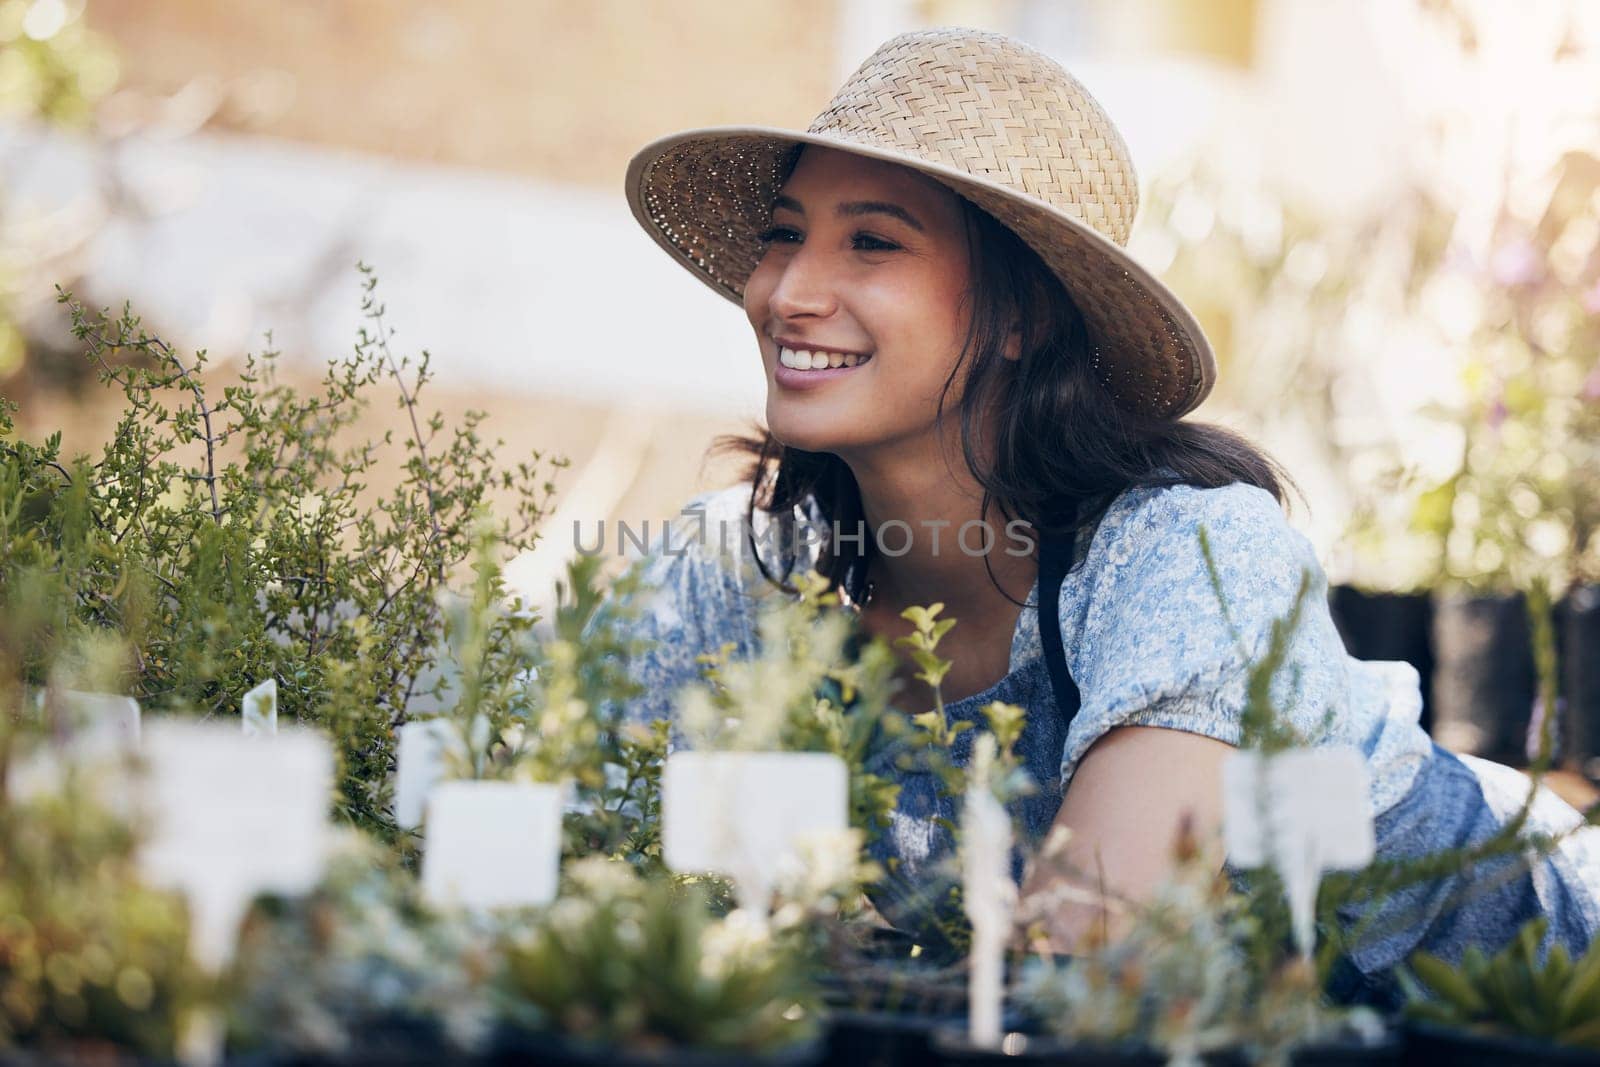 Florist, smile or girl in nature for flowers for growth, ecology development or agriculture business. Happy gardener, nursery or eco friendly farming for plants, horticulture or floral sustainability by YuriArcurs